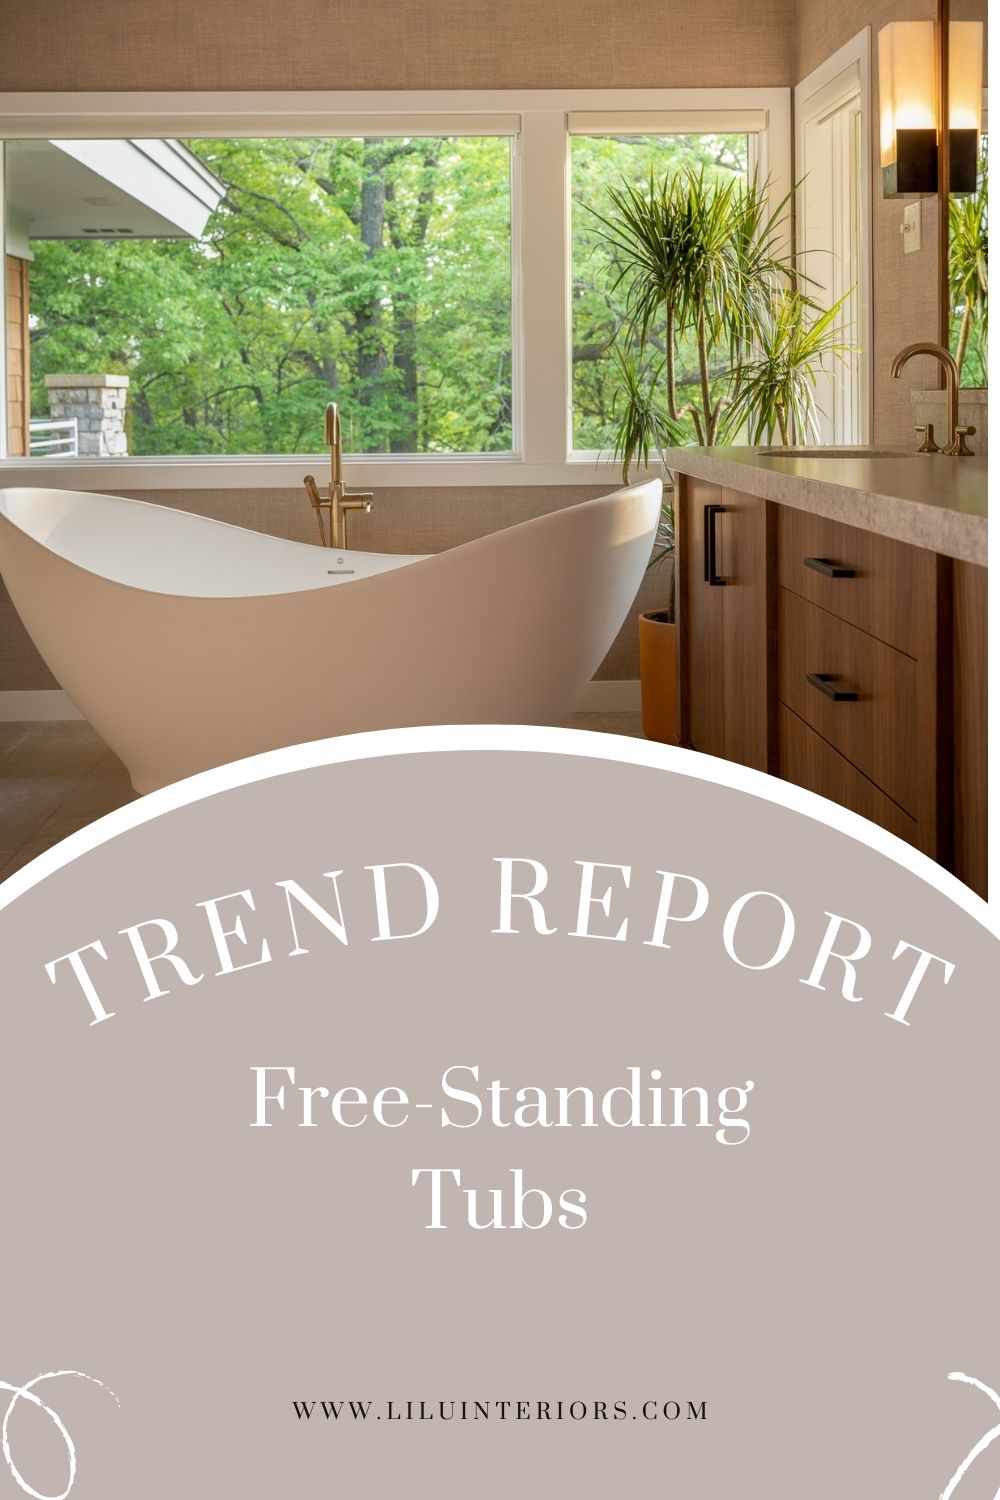 Are free-standing tubs right for your bathroom renovation?